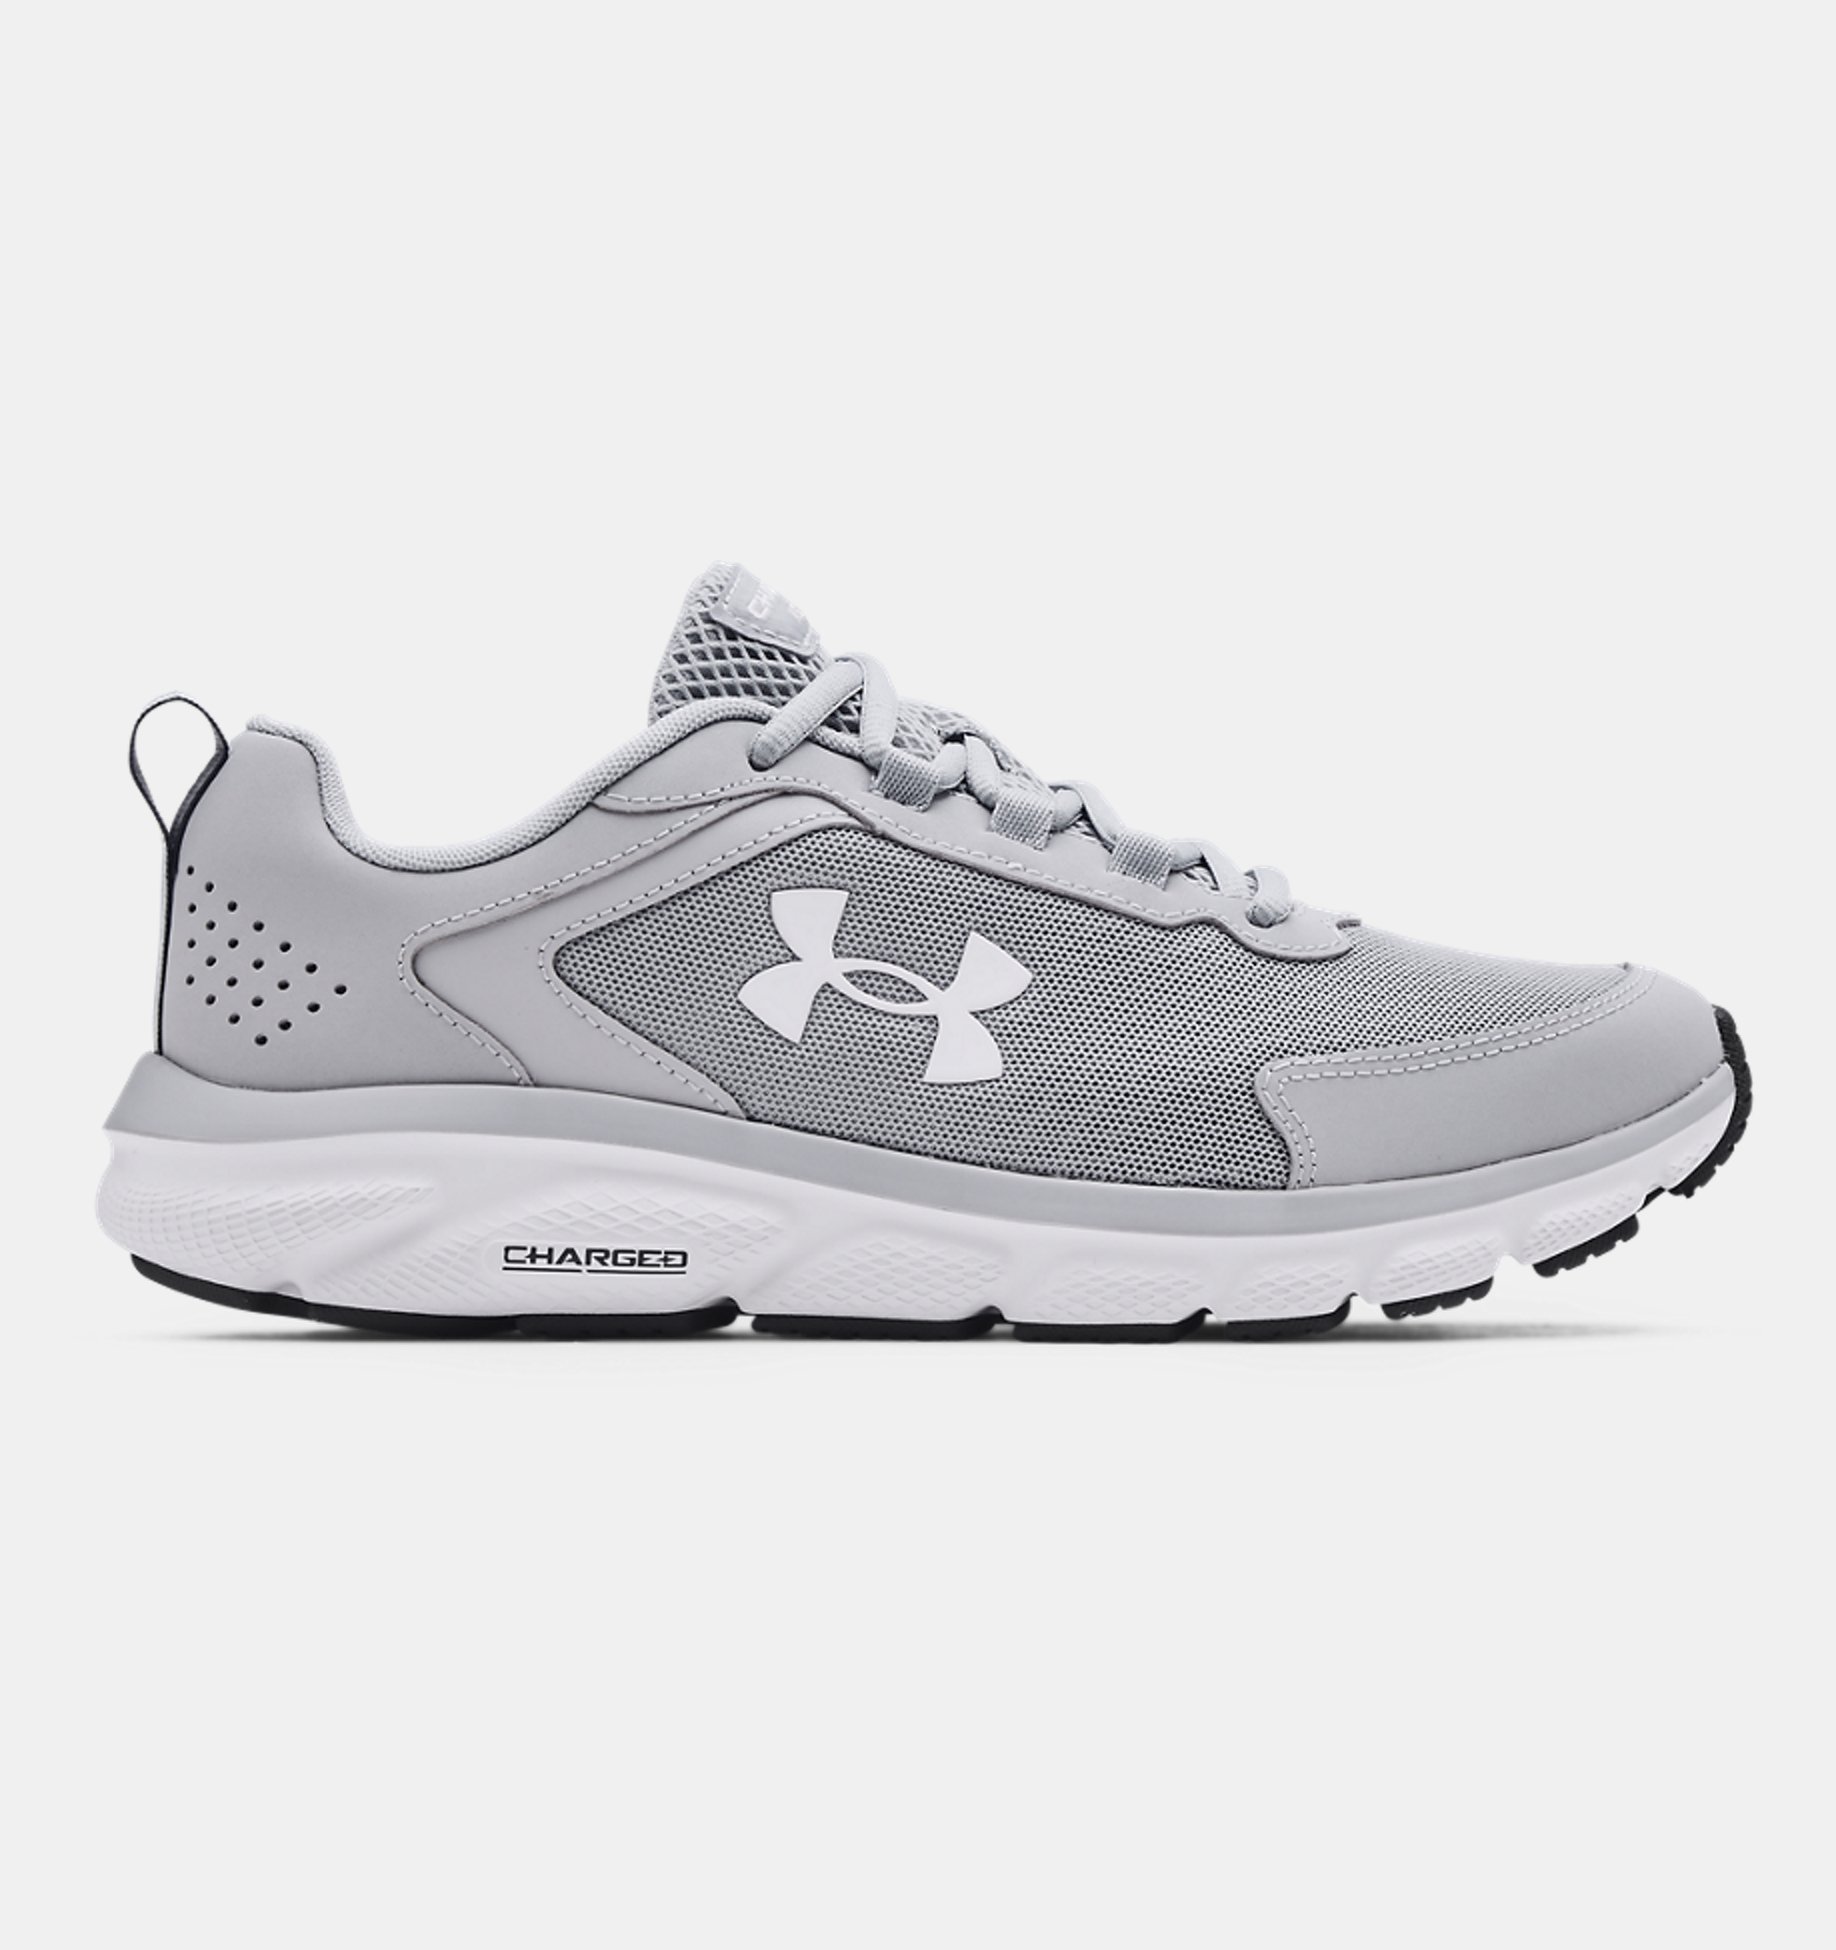 Under Armour Rail Fit Men's Black Running Trainers Lightweight Sneakers 